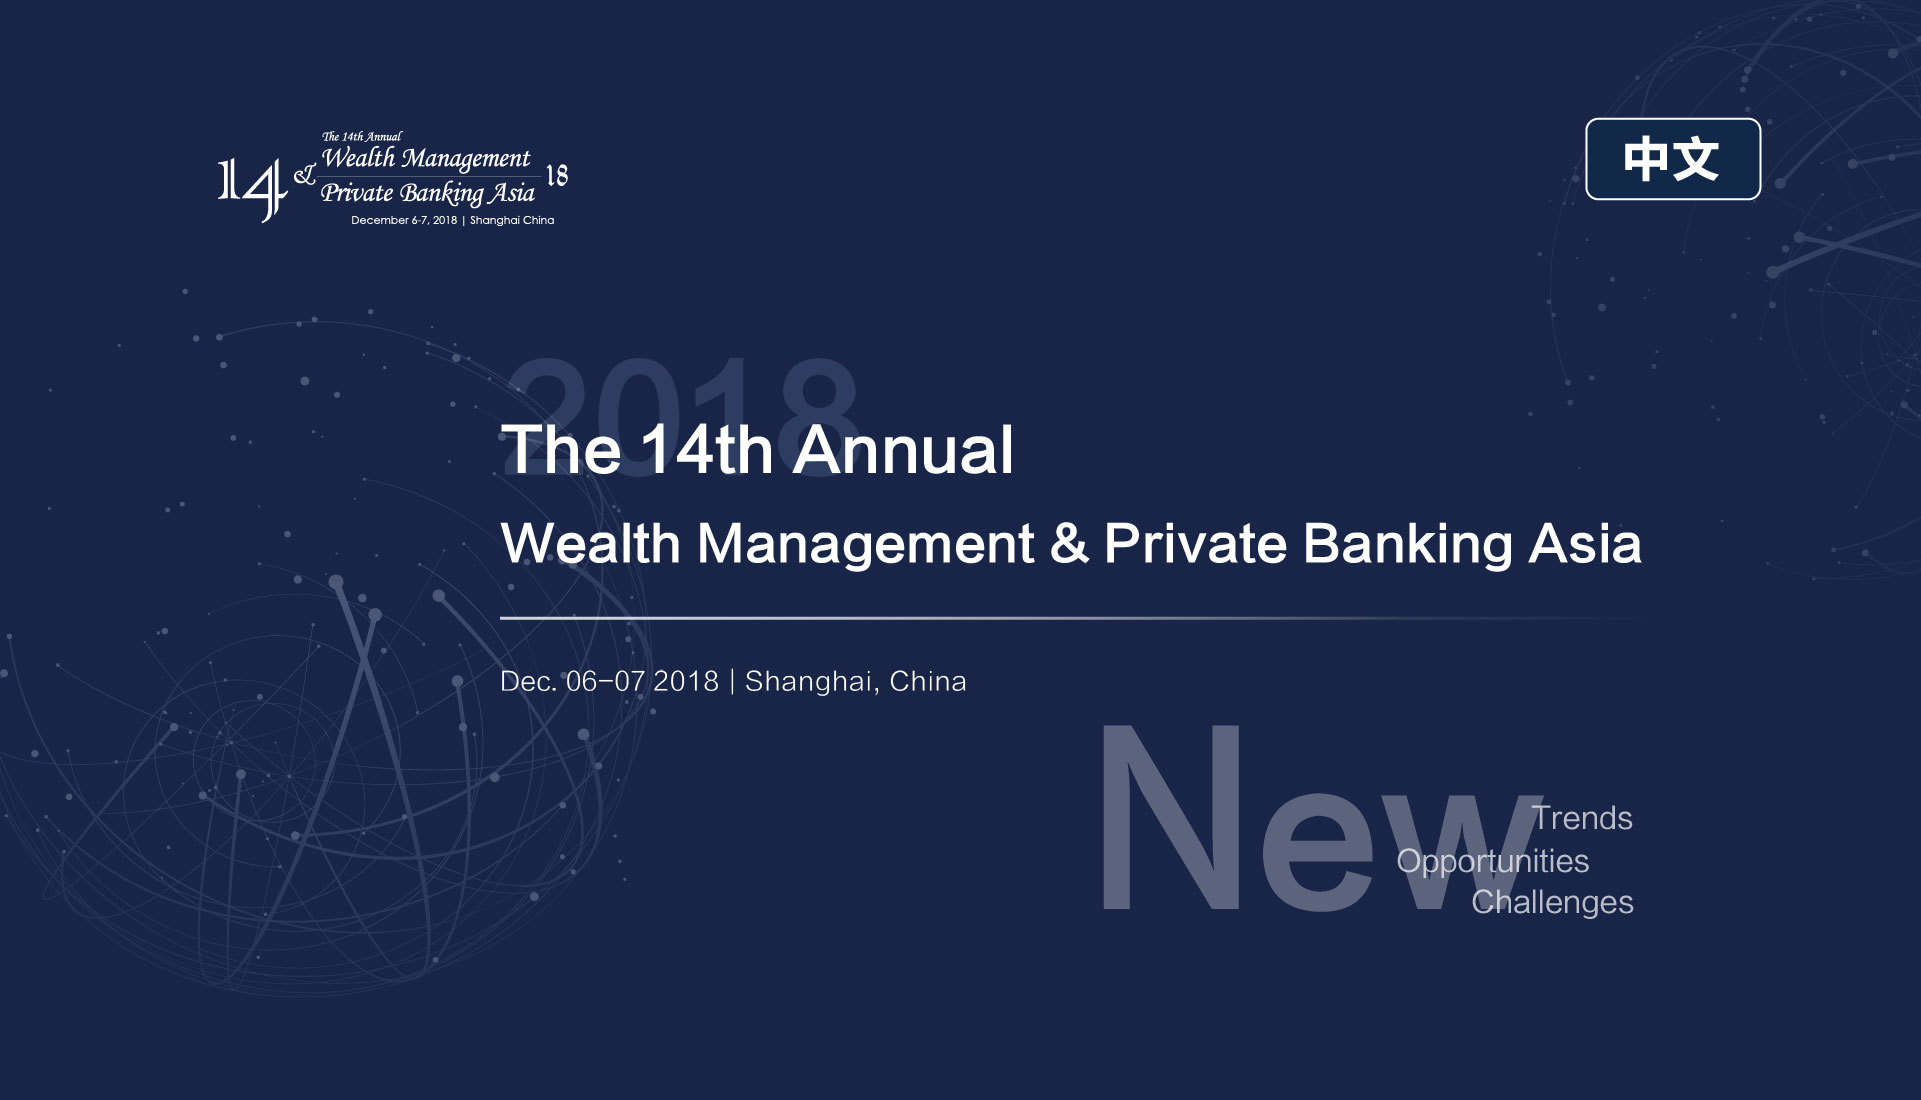 2018 The 14th Annual Wealth Management & Private Banking Asia